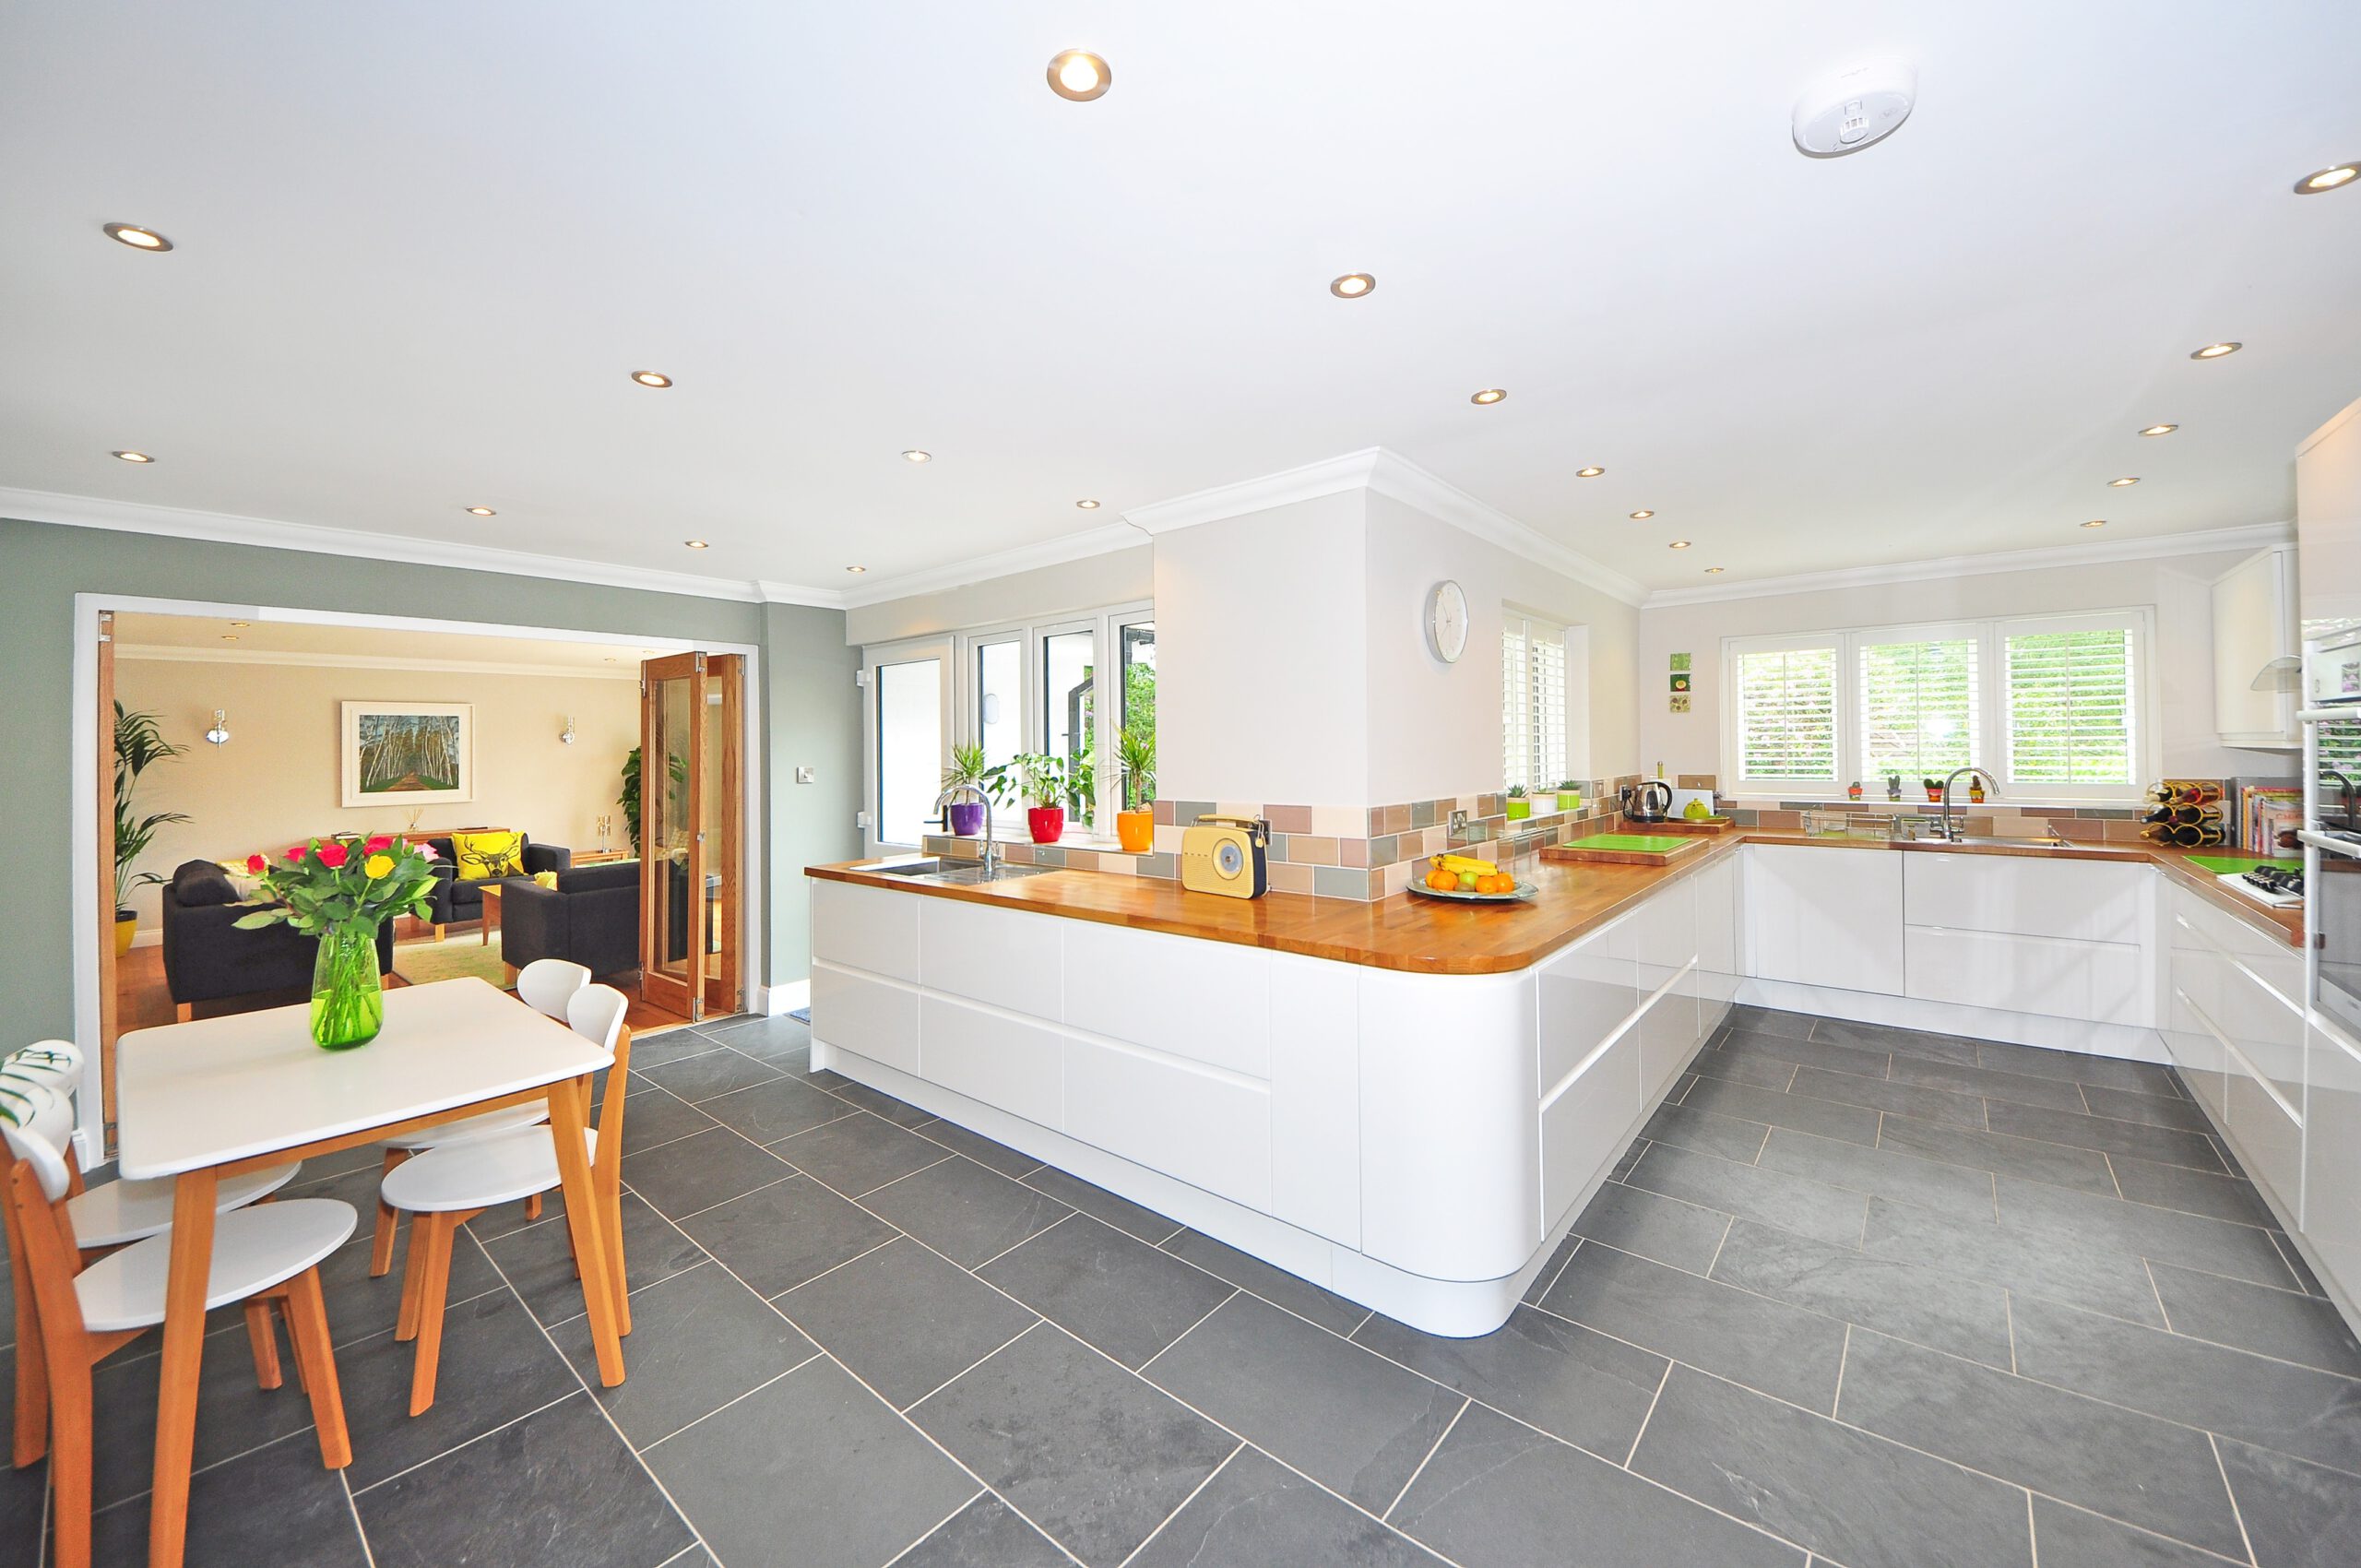 How to Select Suitable Tiles For Your Kitchen